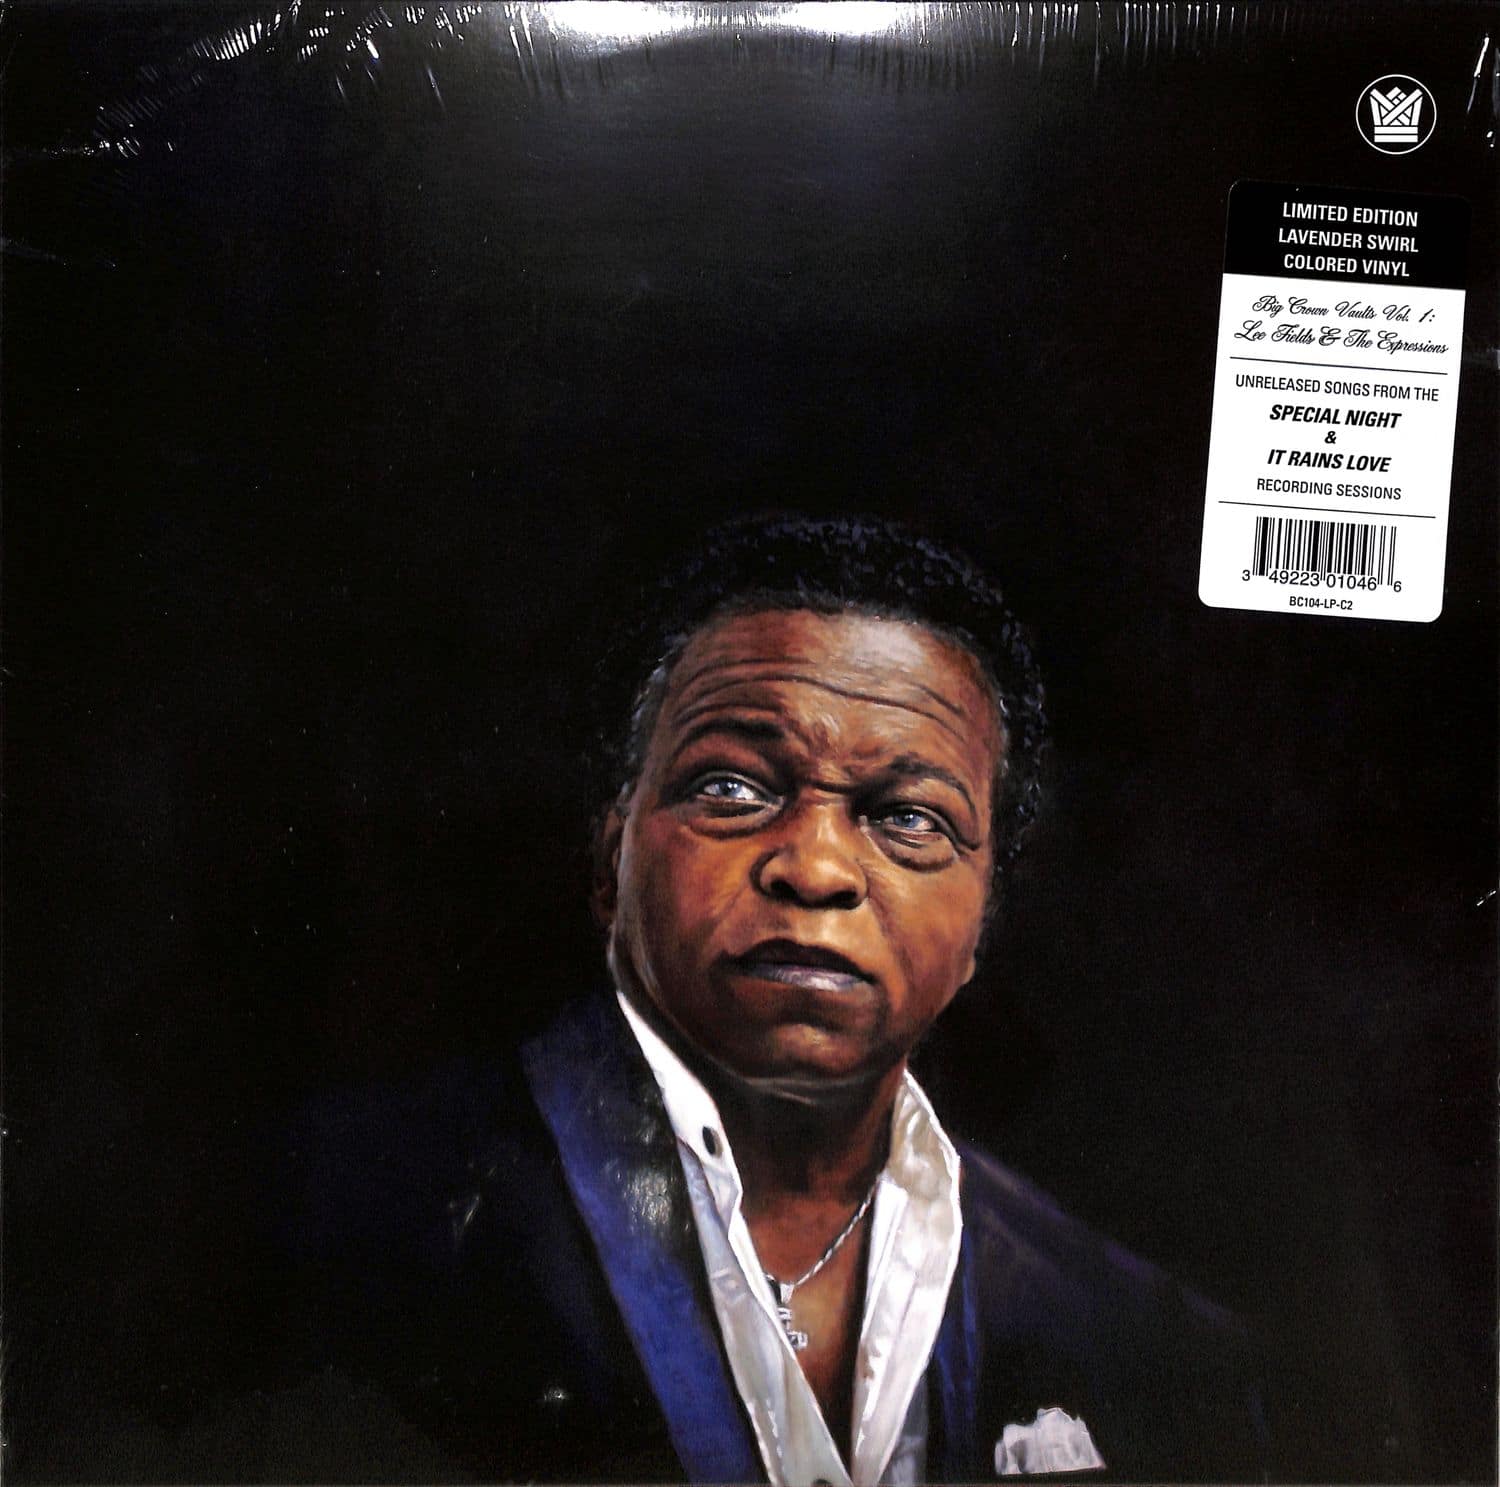 Lee Fields & The Expressions - BIG CROWN VAULTS VOL.1 